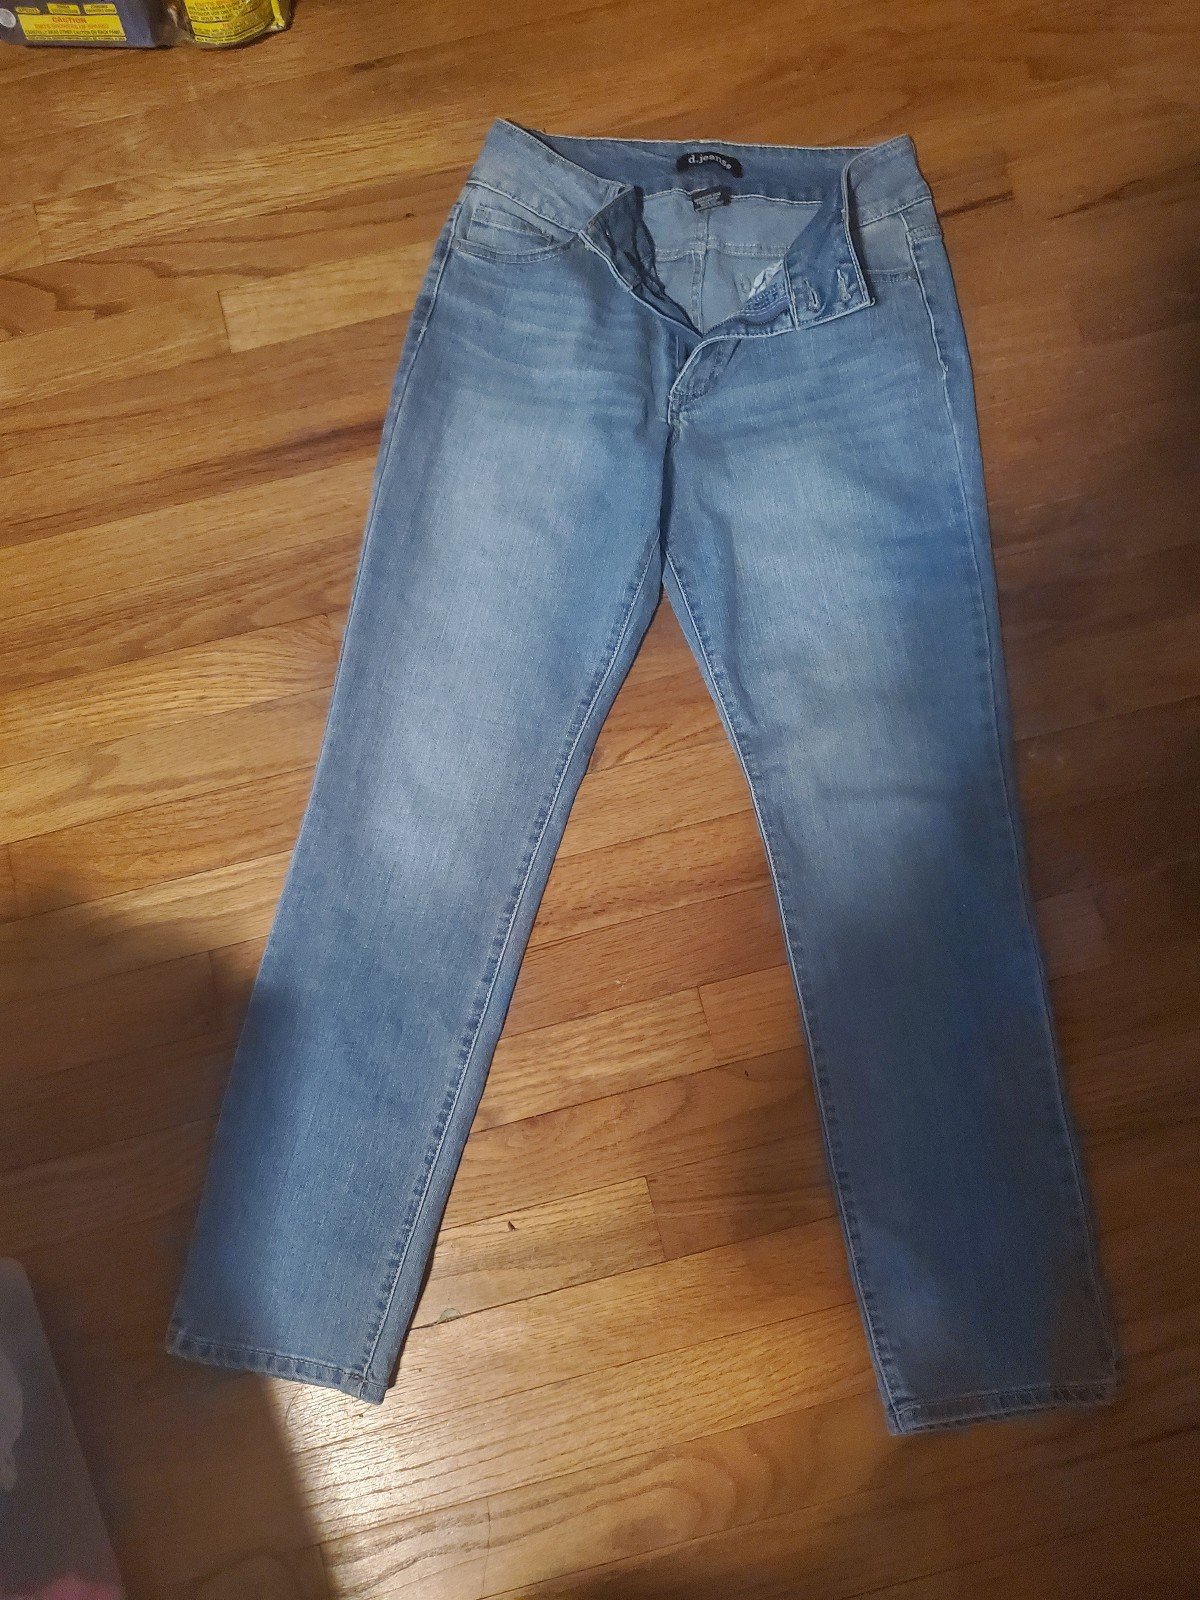 high discount Size 6 jeans iI5XOFv4M on sale